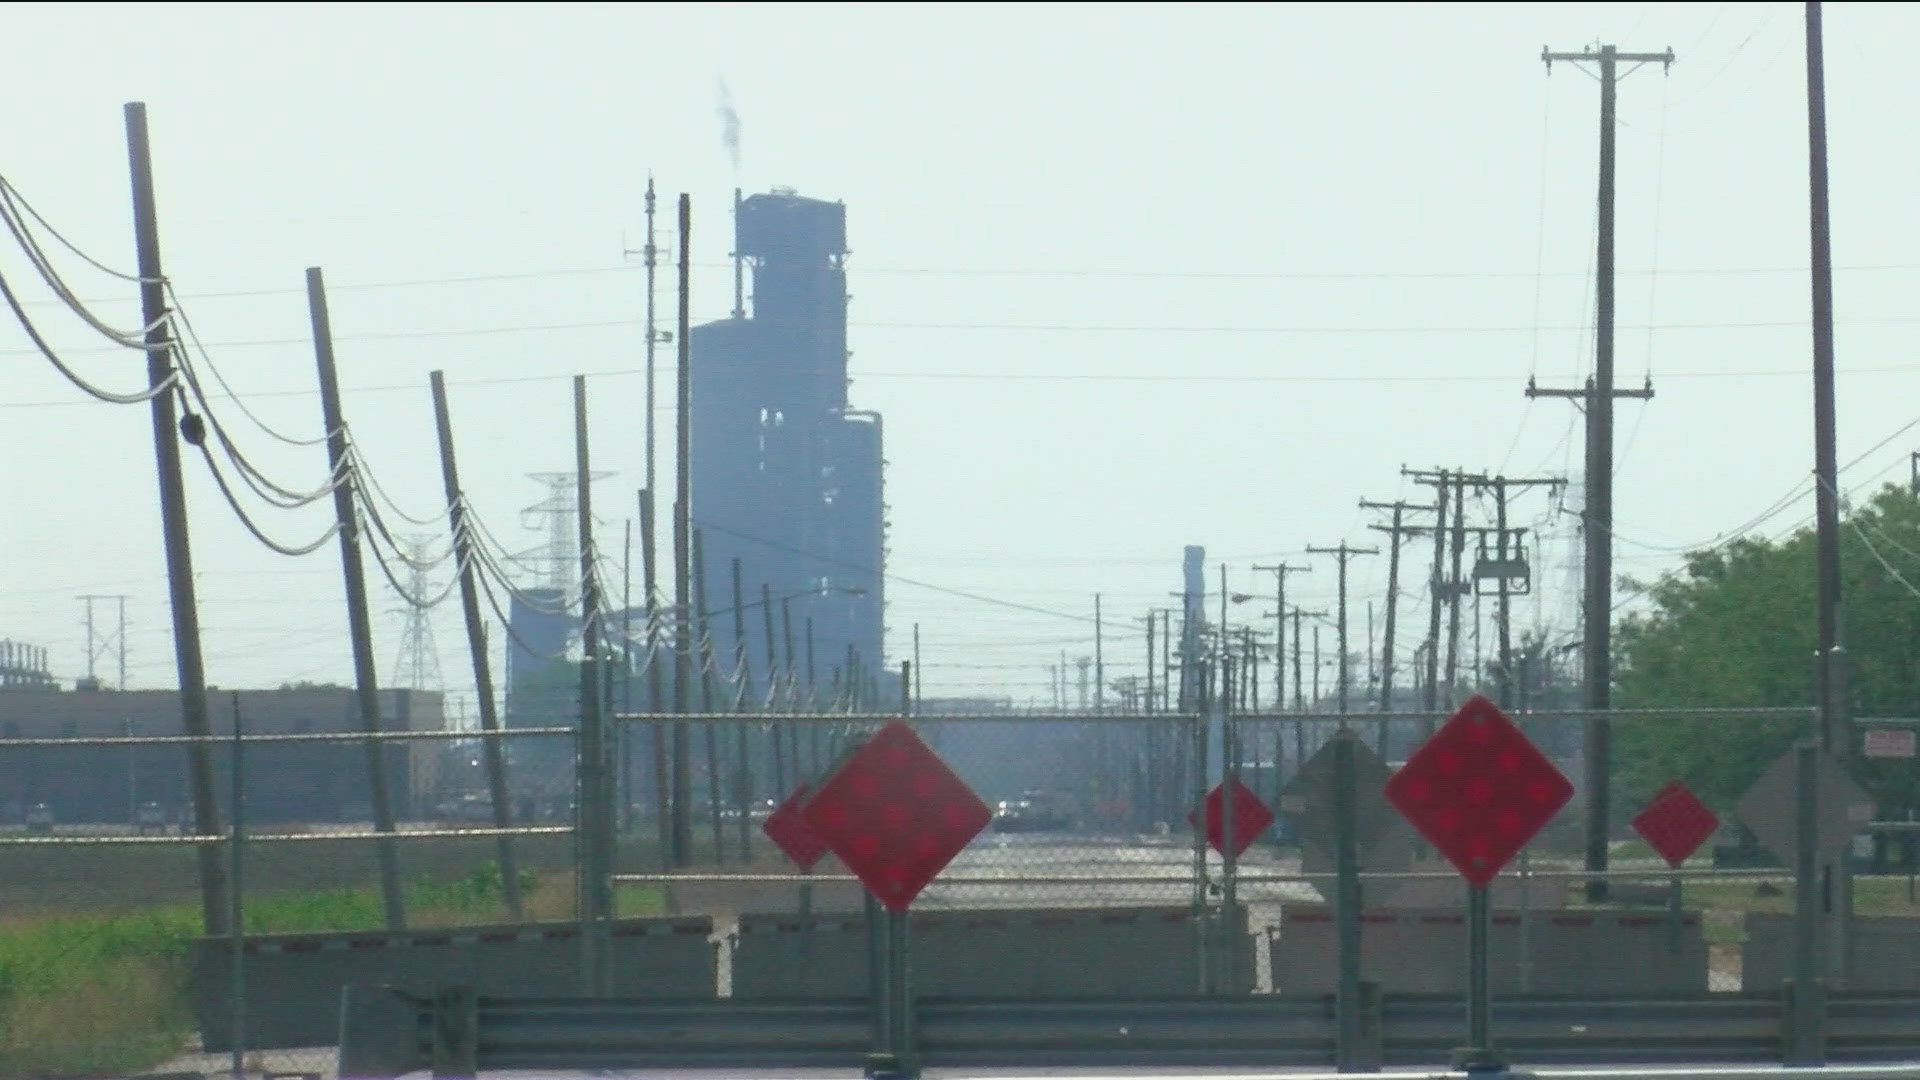 The director of the Ohio Environmental Protection Agency says the area's moderate air quality levels are due to ground-level ozone accumulation.